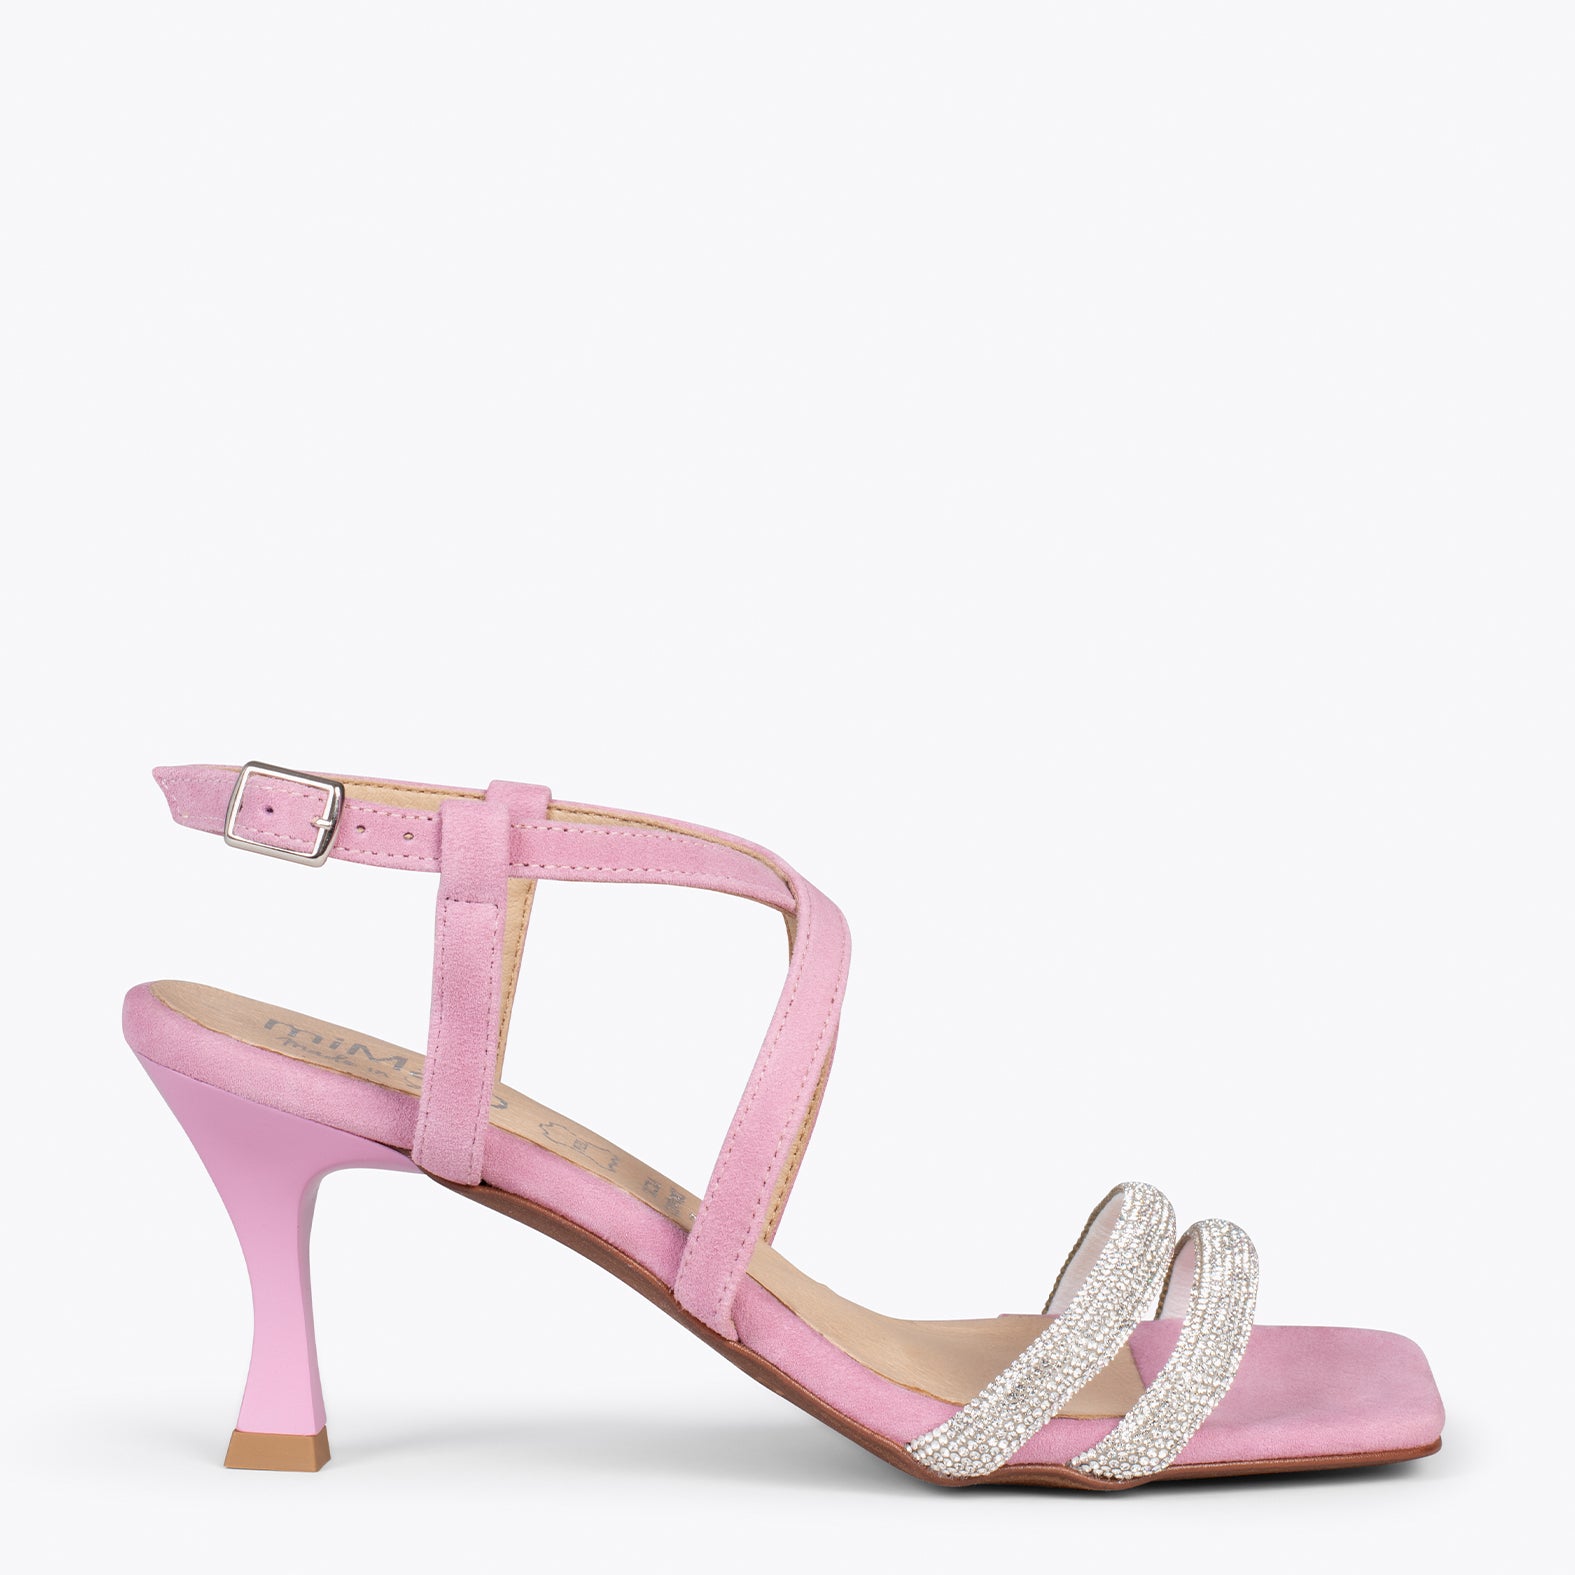 SHINY – PINK high heel sandals with strass straps